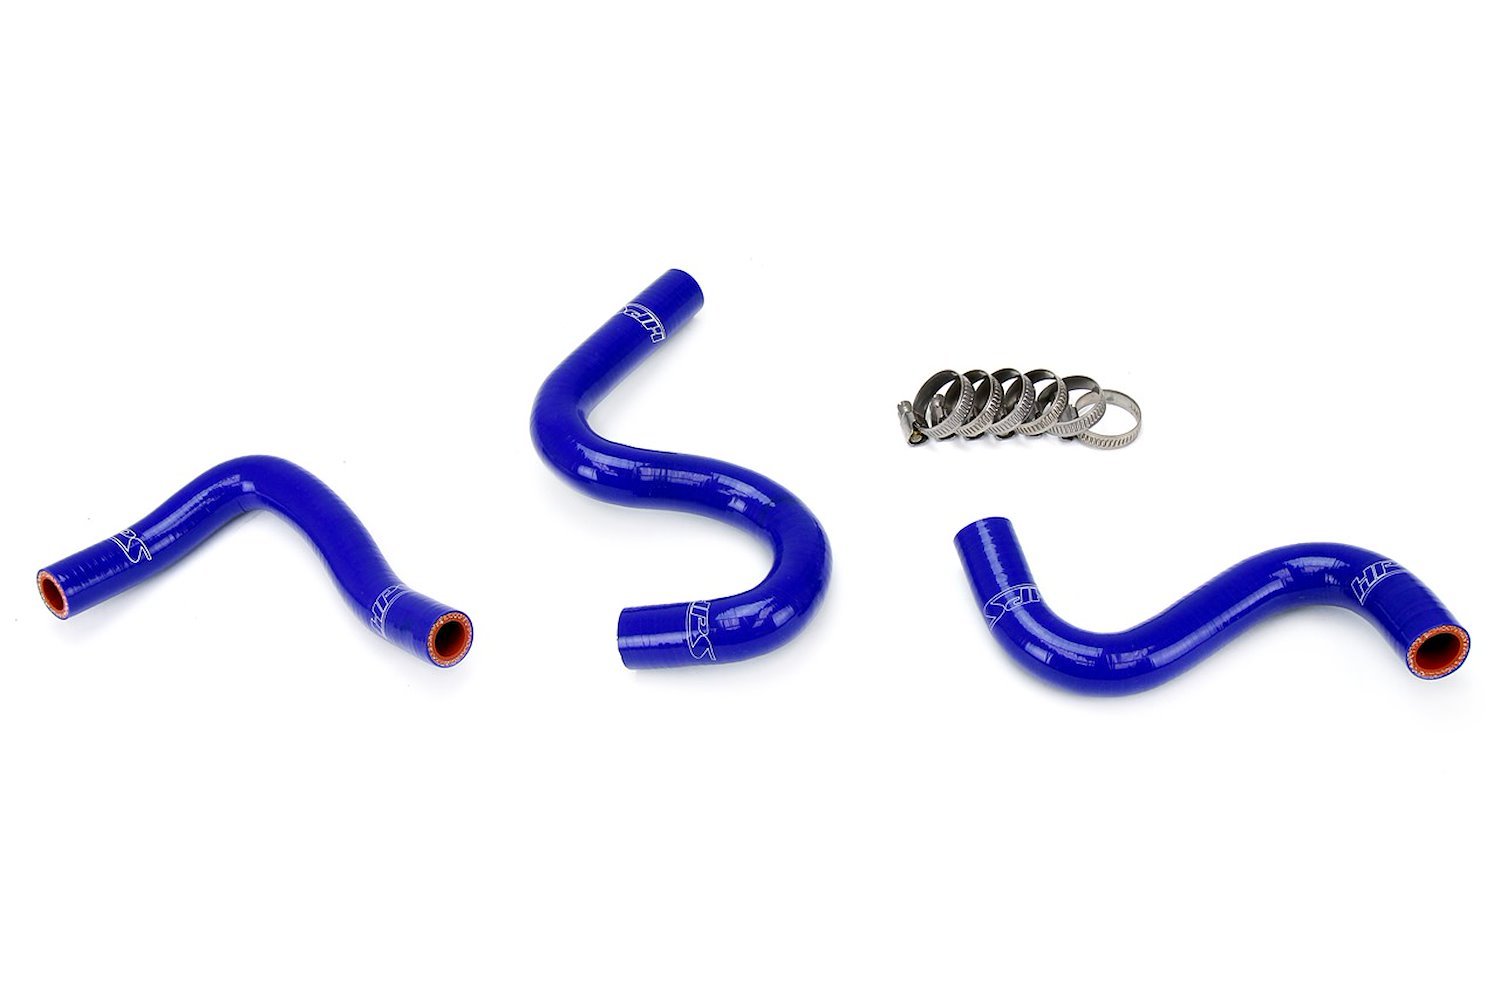 57-1223-BLUE Heater Hose Kit, High-Temp 3-Ply Reinforced Silicone, Replace OEM Rubber Heater Coolant Hoses